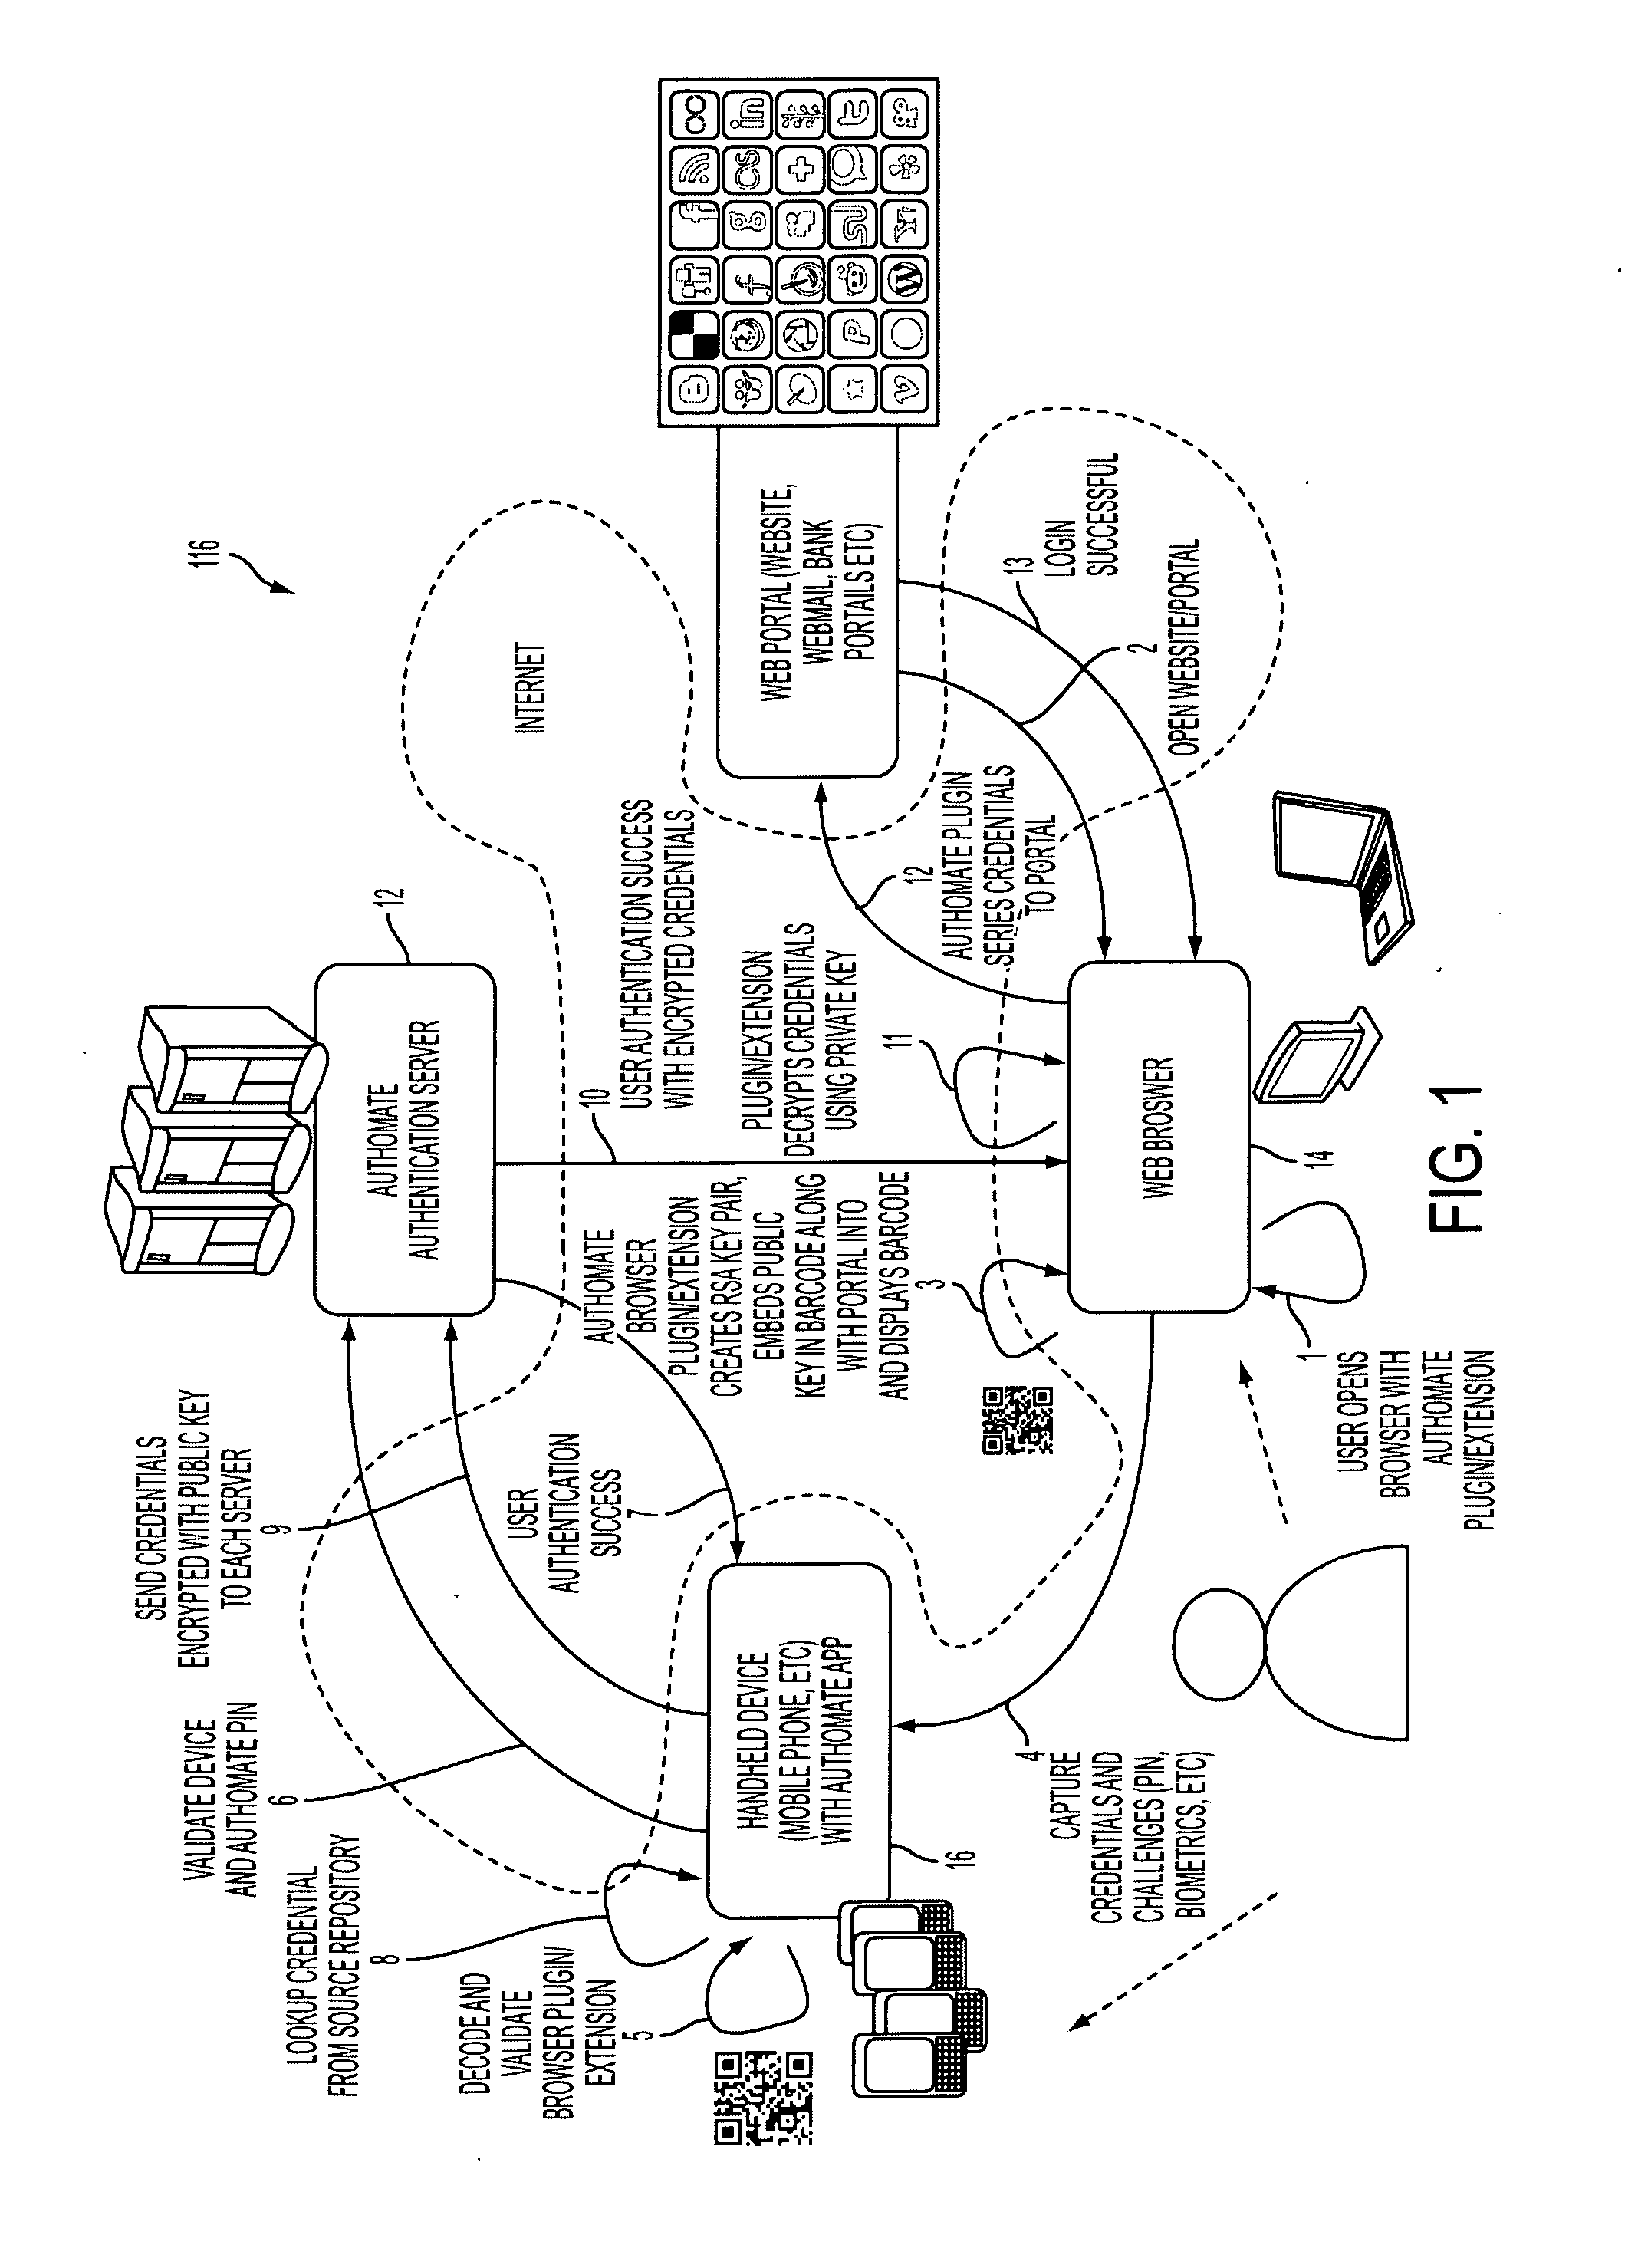 System, design and process for easy to use credentials management for online accounts using out-of-band authentication